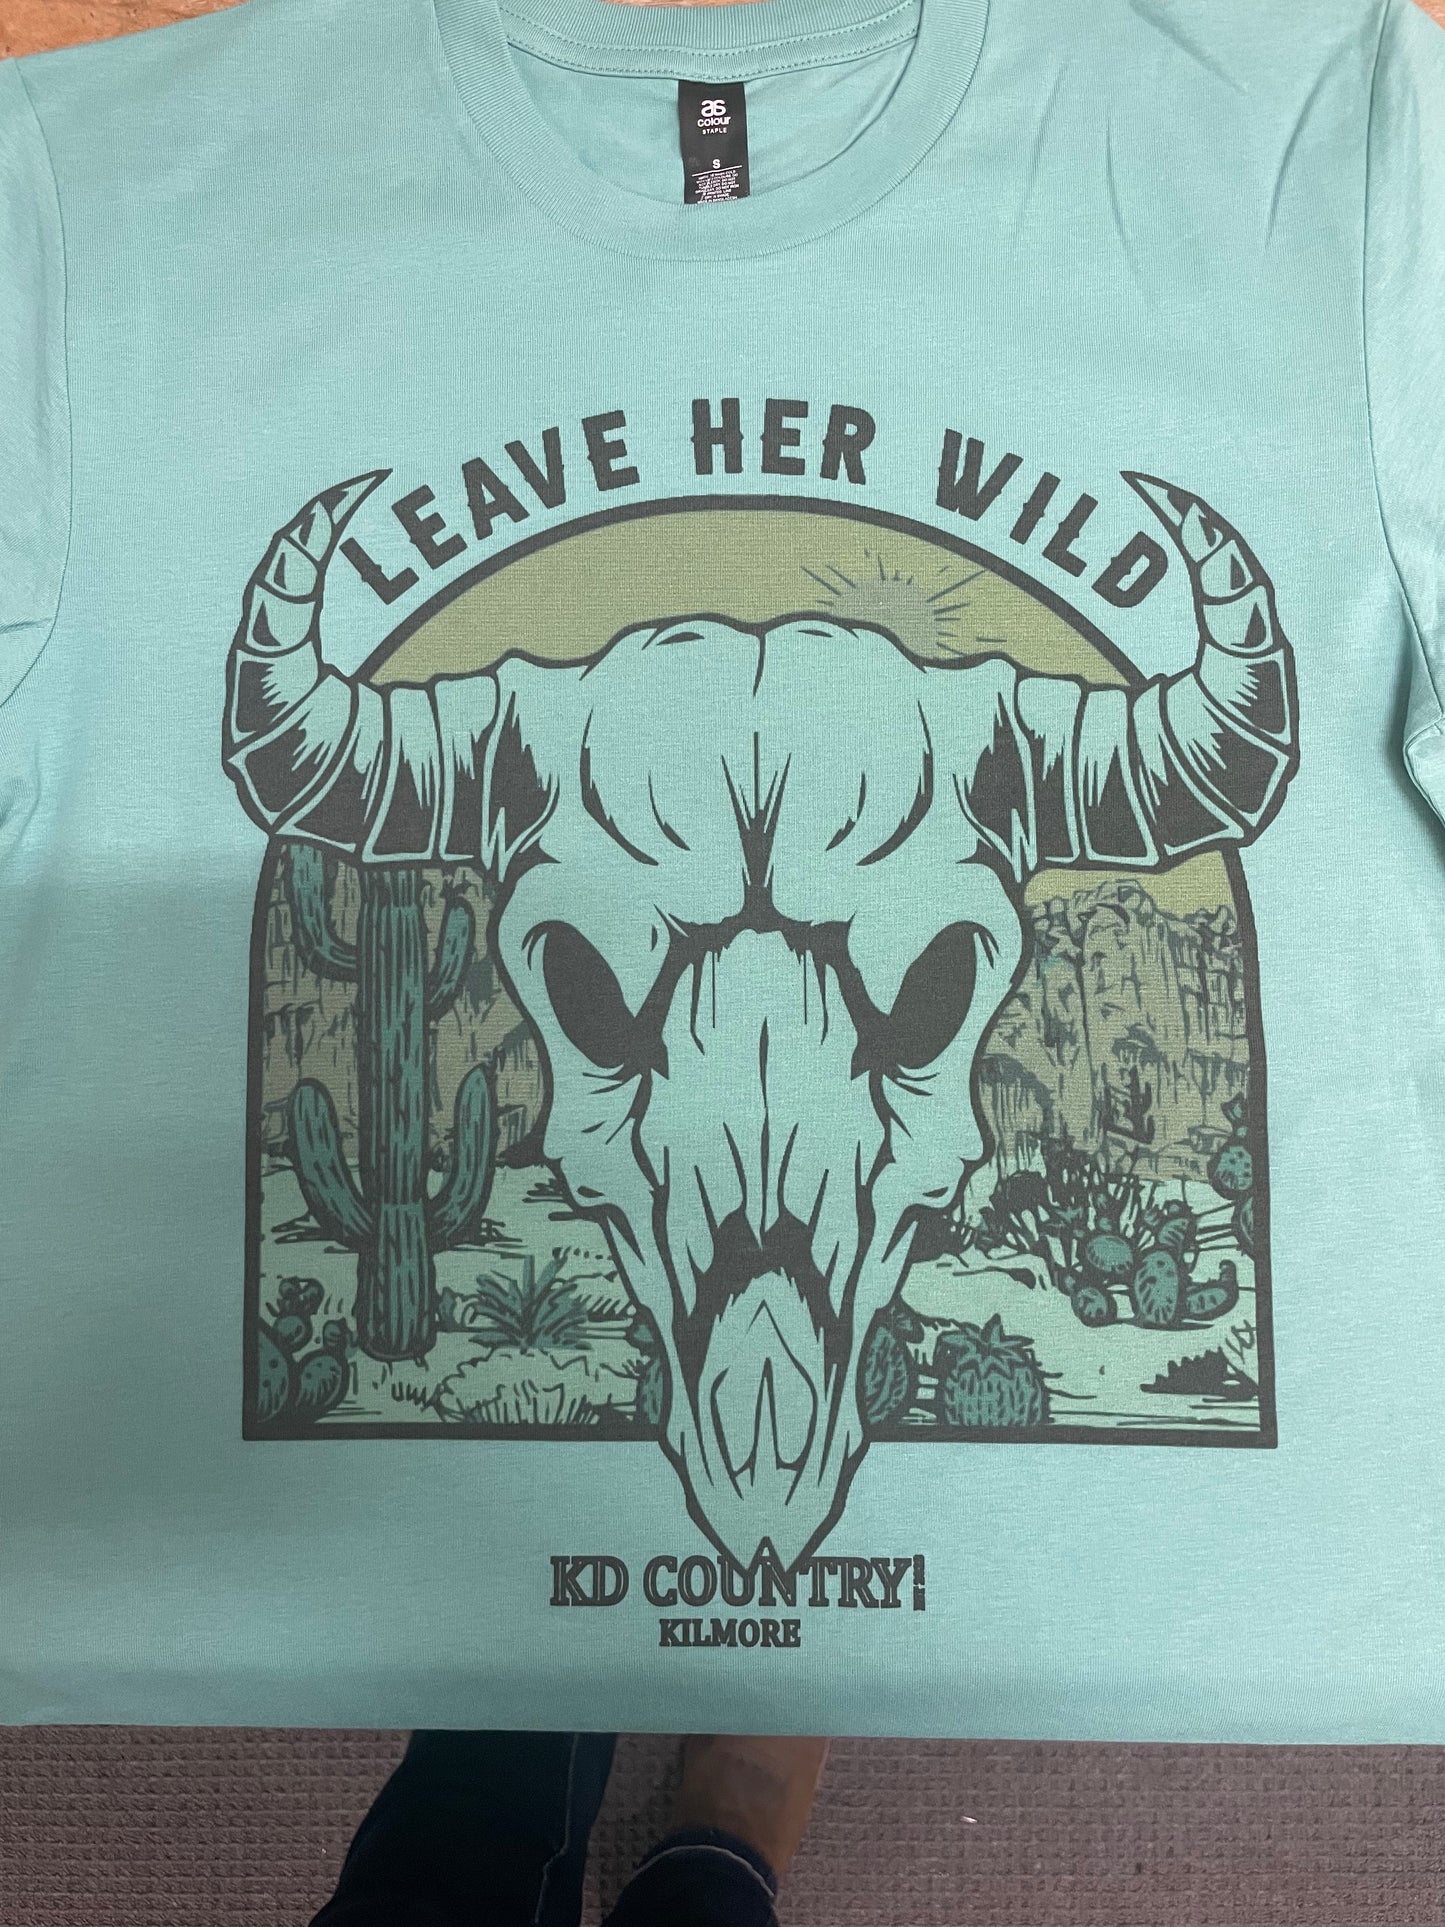 KD Country Tee Adult Green - Leave Her Wild